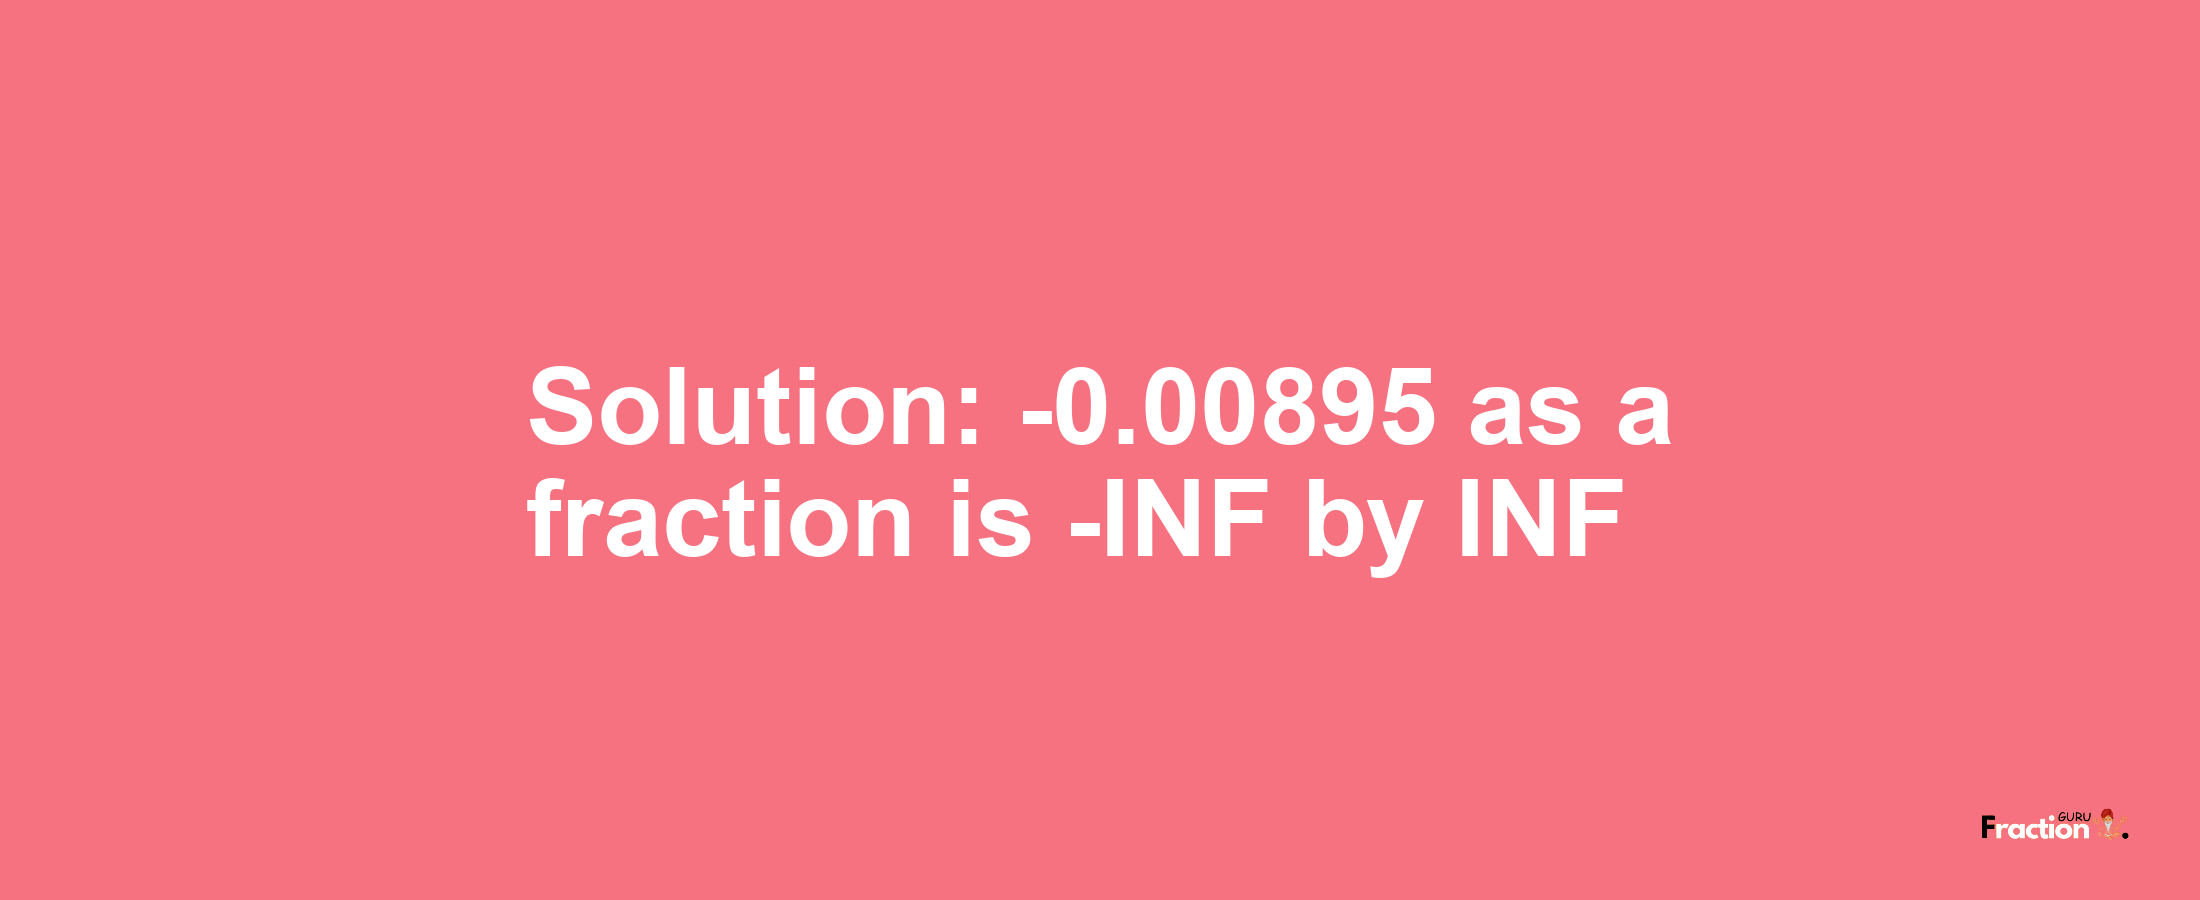 Solution:-0.00895 as a fraction is -INF/INF